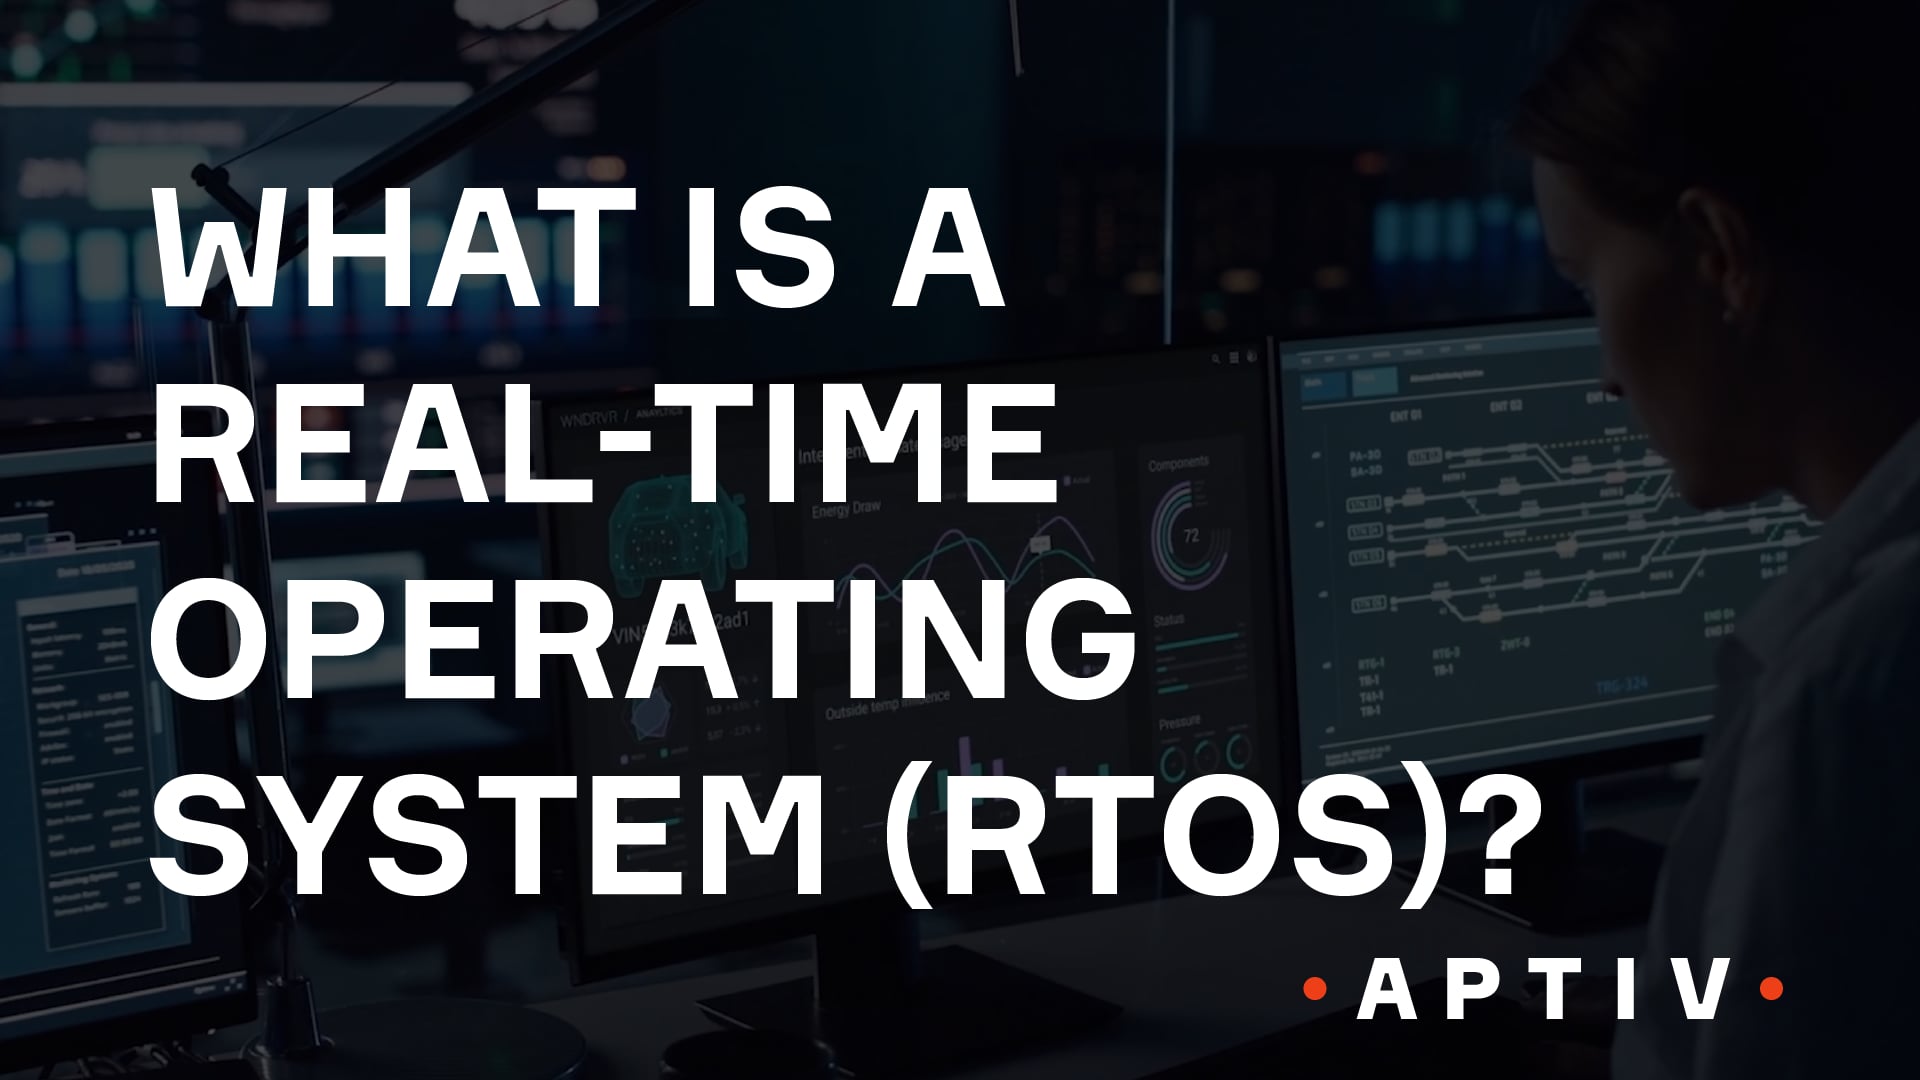 What Is a Real-Time Operating System (RTOS)?